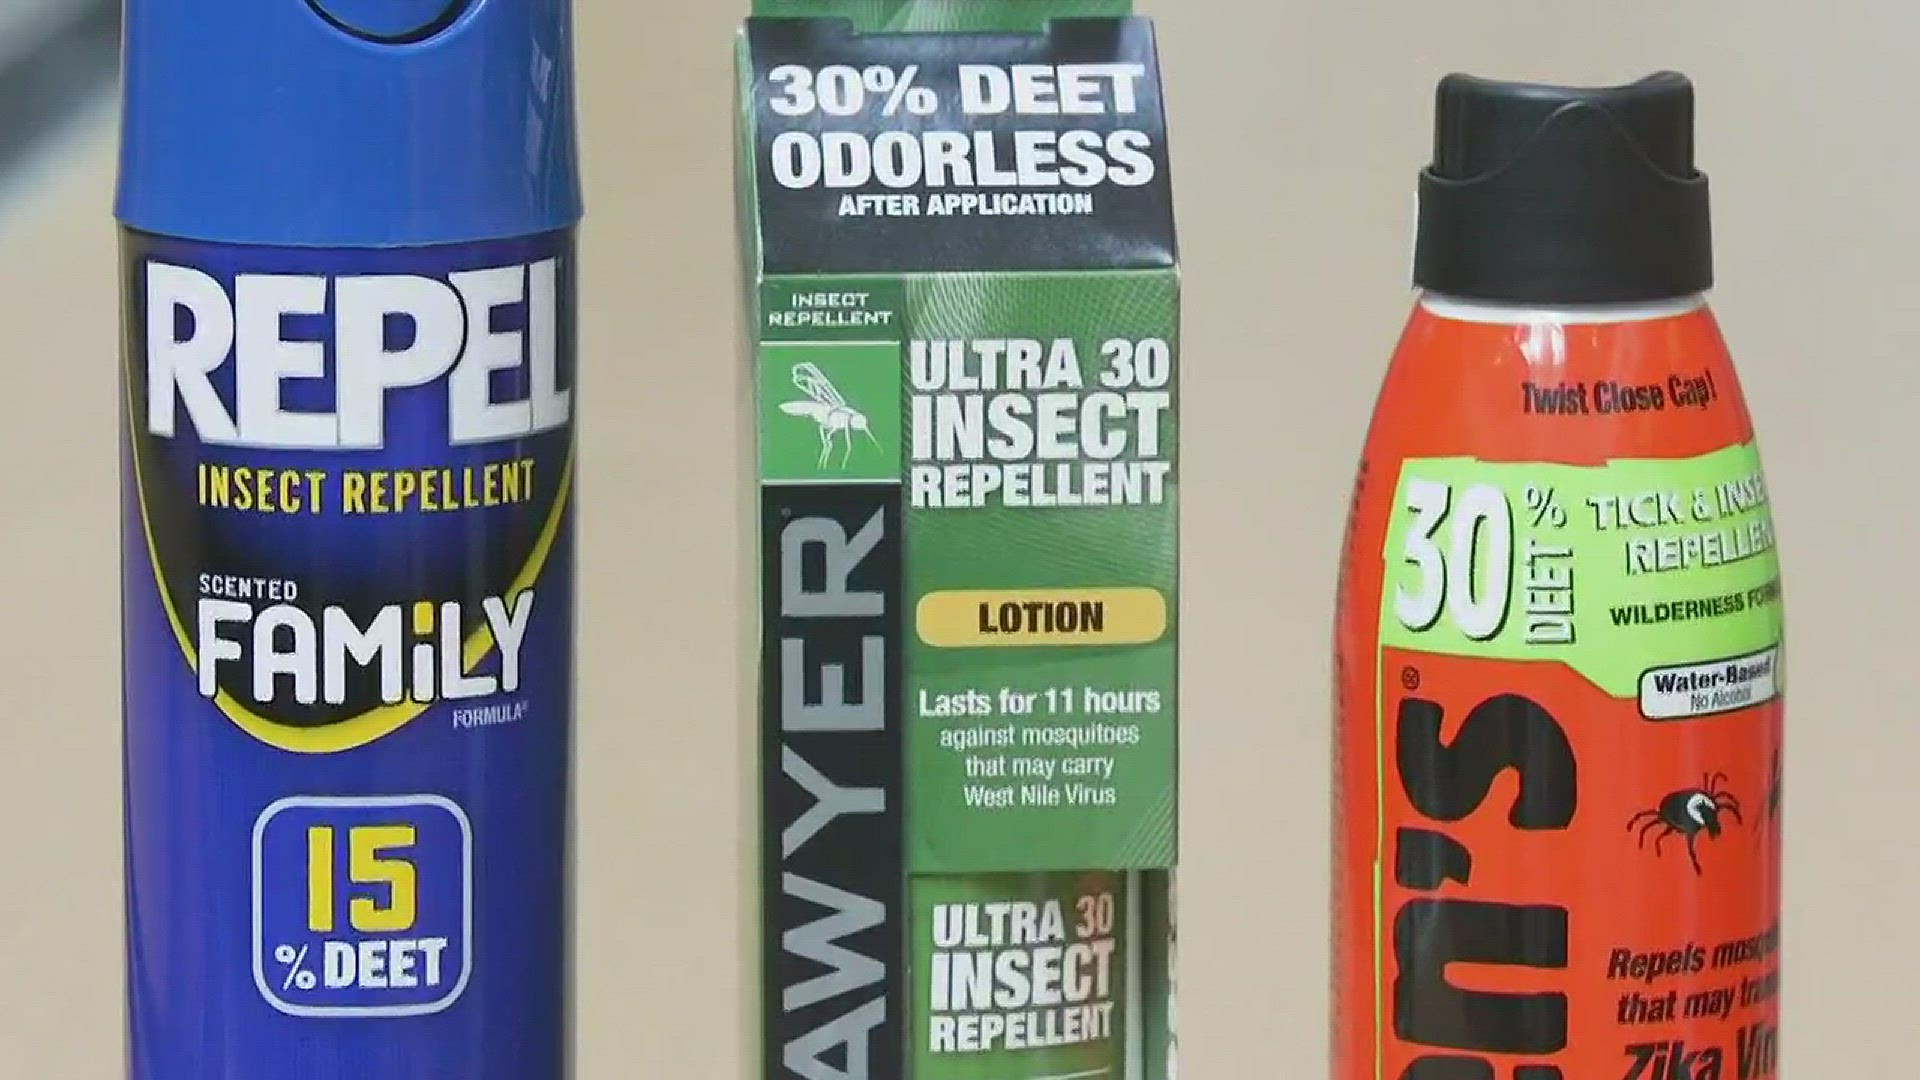 Consumer Reports rates and reviews the best insect repellent to protect you and your family.